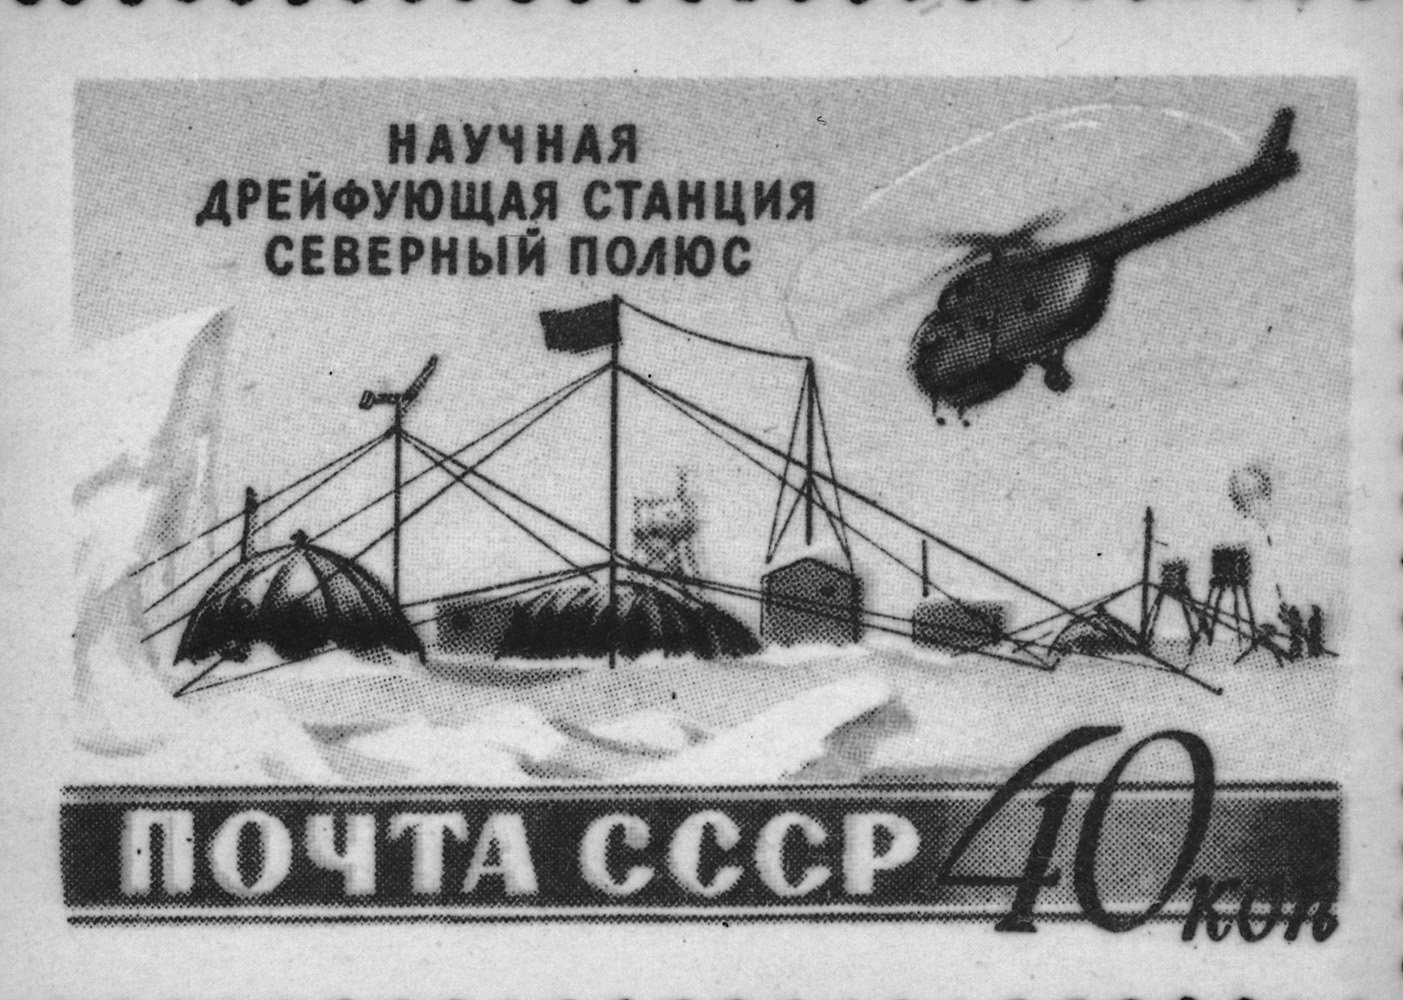 A Soviet postage stamp devoted to the exploration of the Arctic and the Antarctic. Reproduction